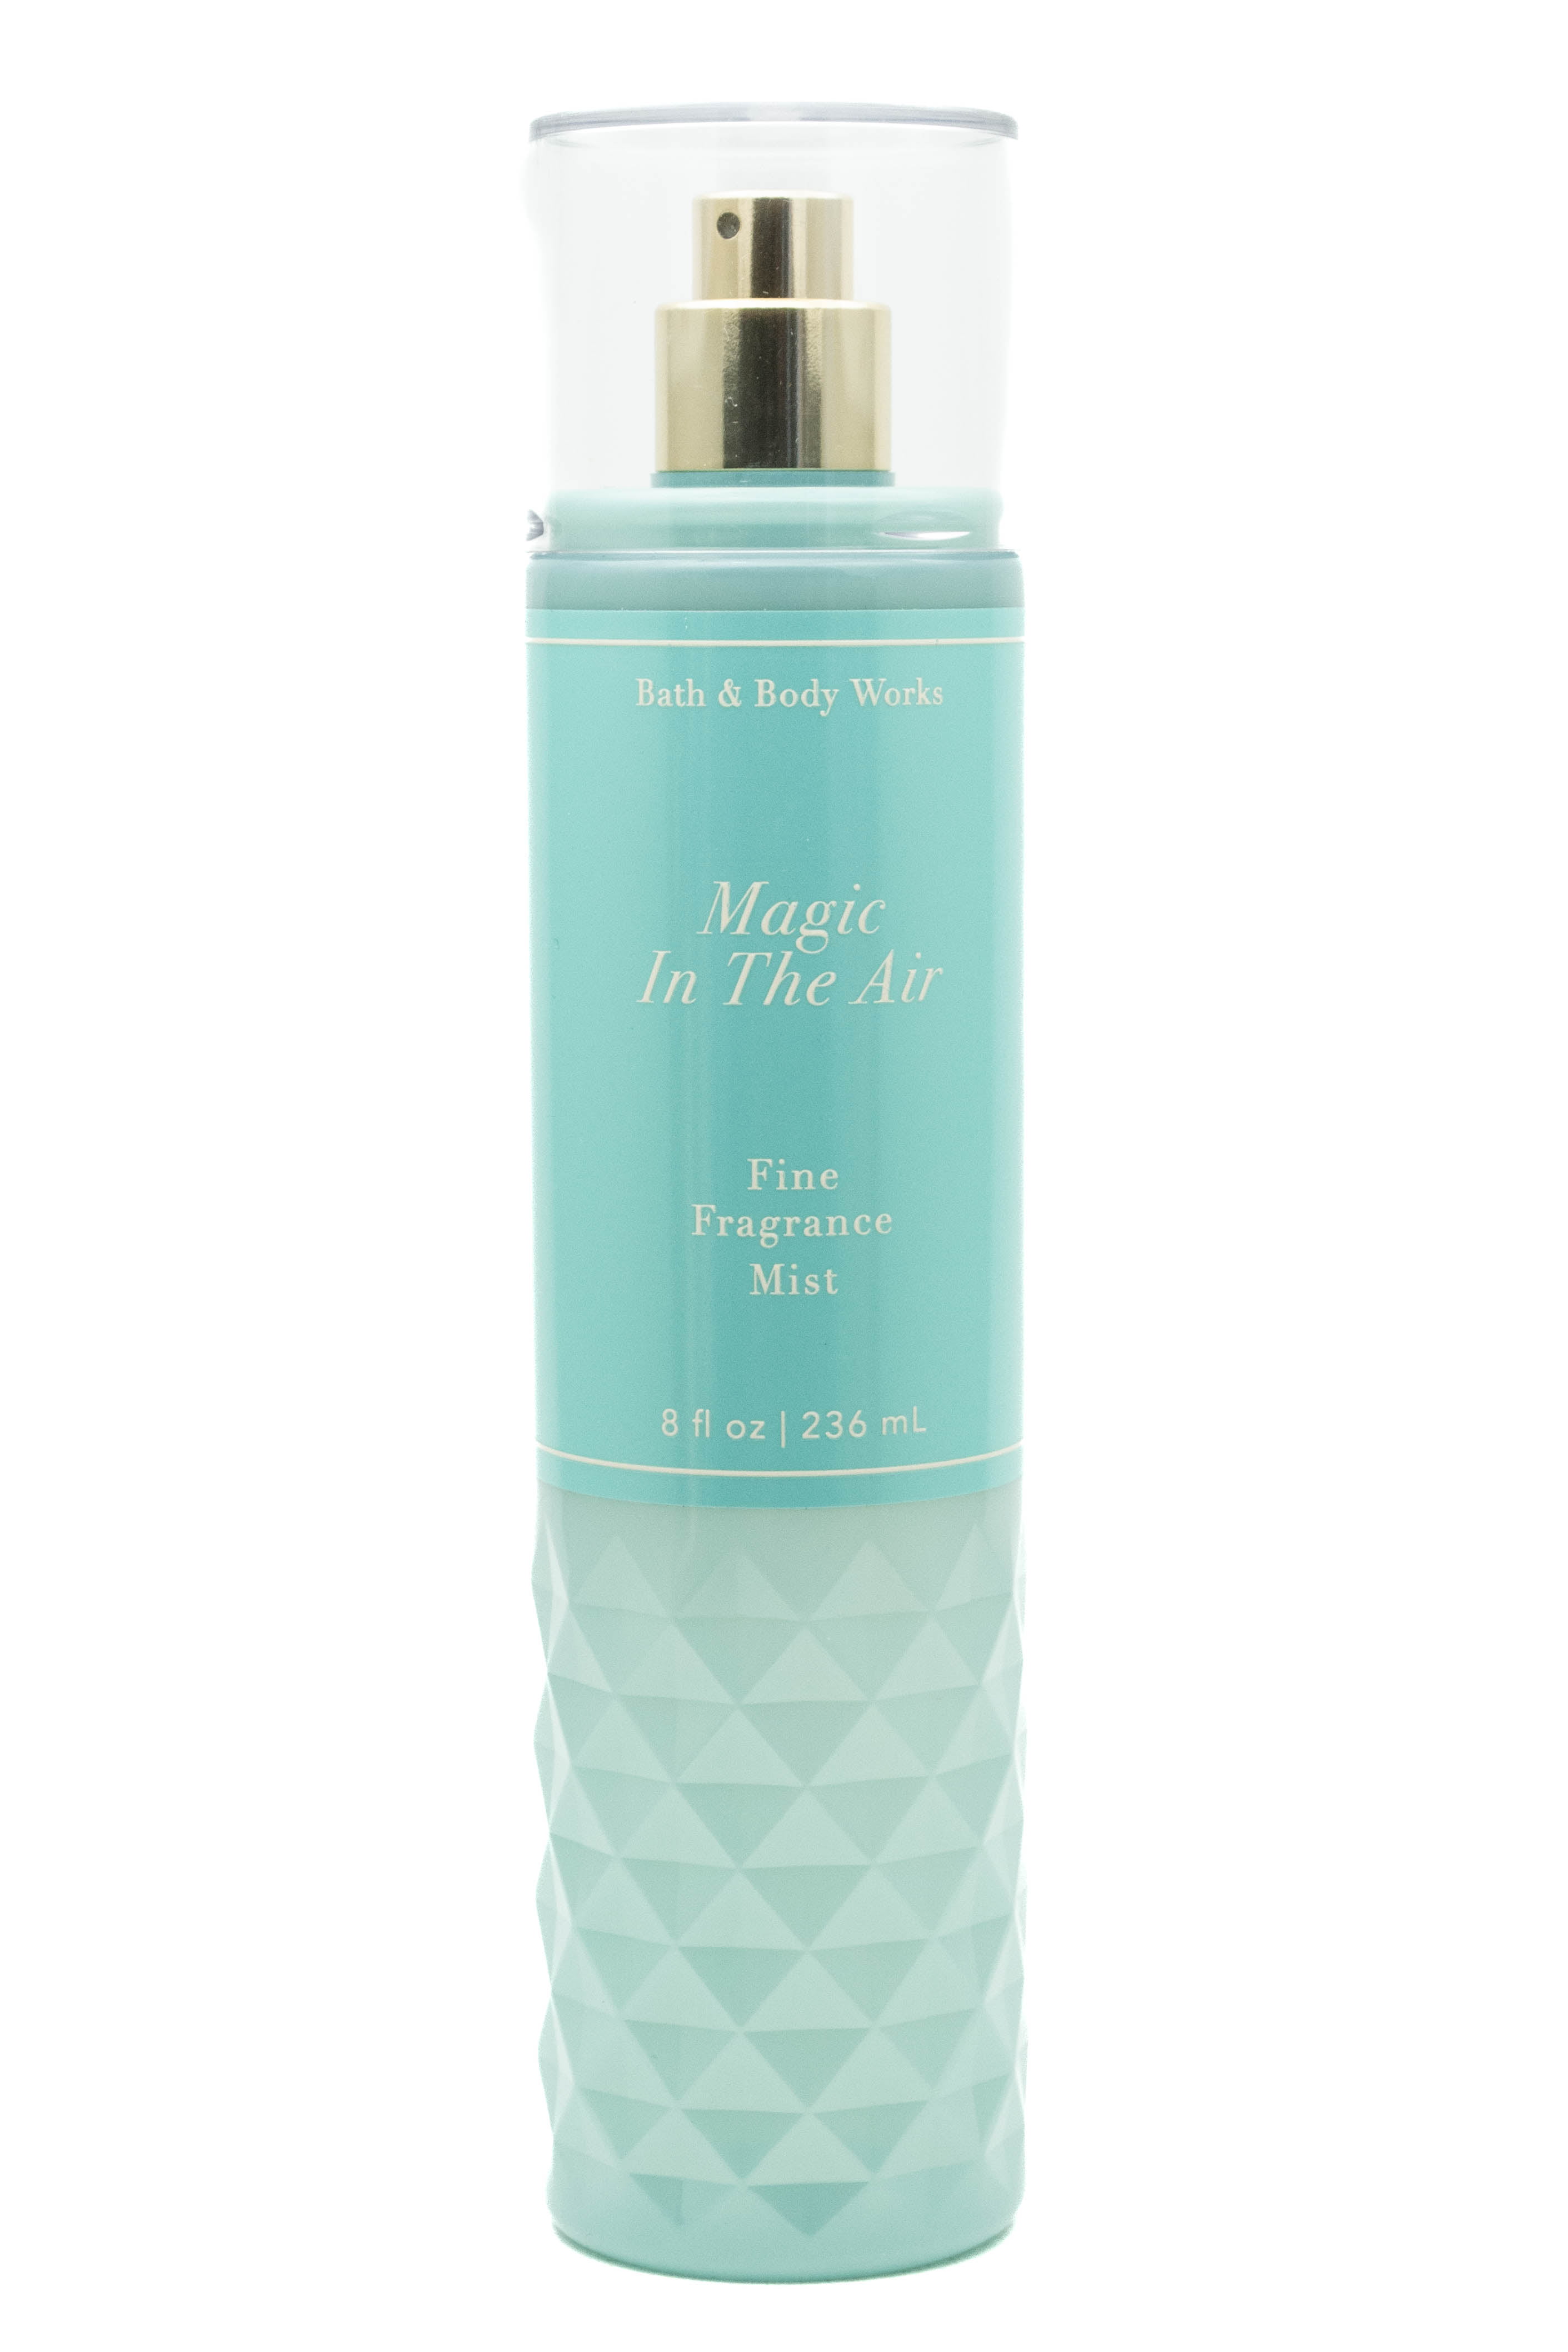 Bath and Body Works Magic in the Air Fine Fragrance Mists Pack Of 2 8 oz.  Bottles (Magic in the Air) : Beauty & Personal Care 